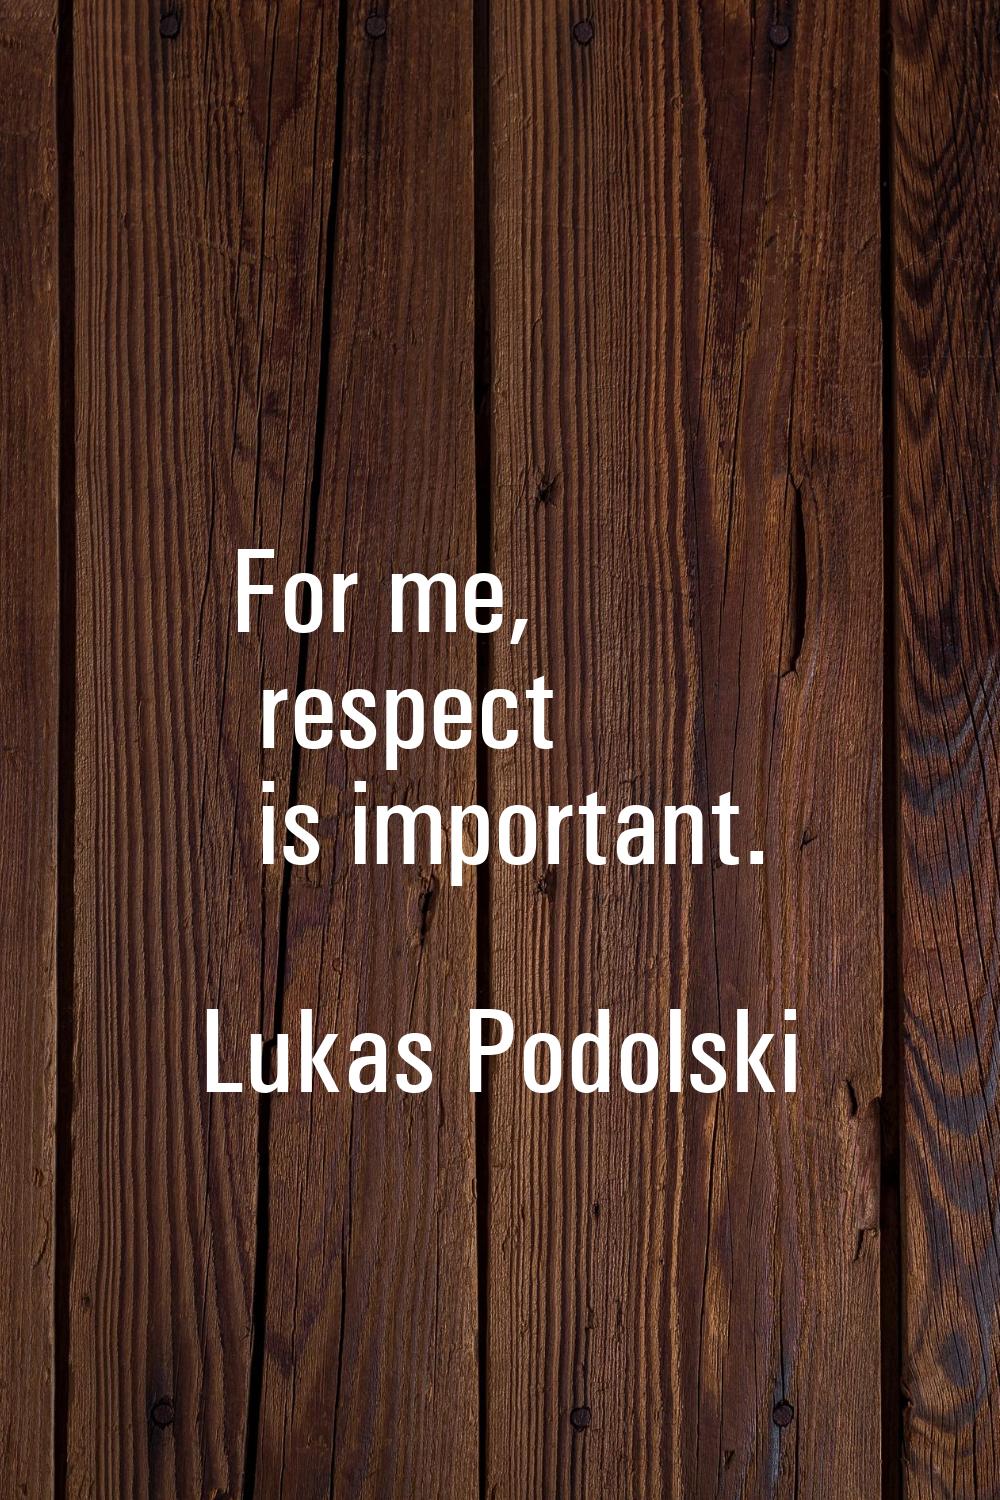 For me, respect is important.